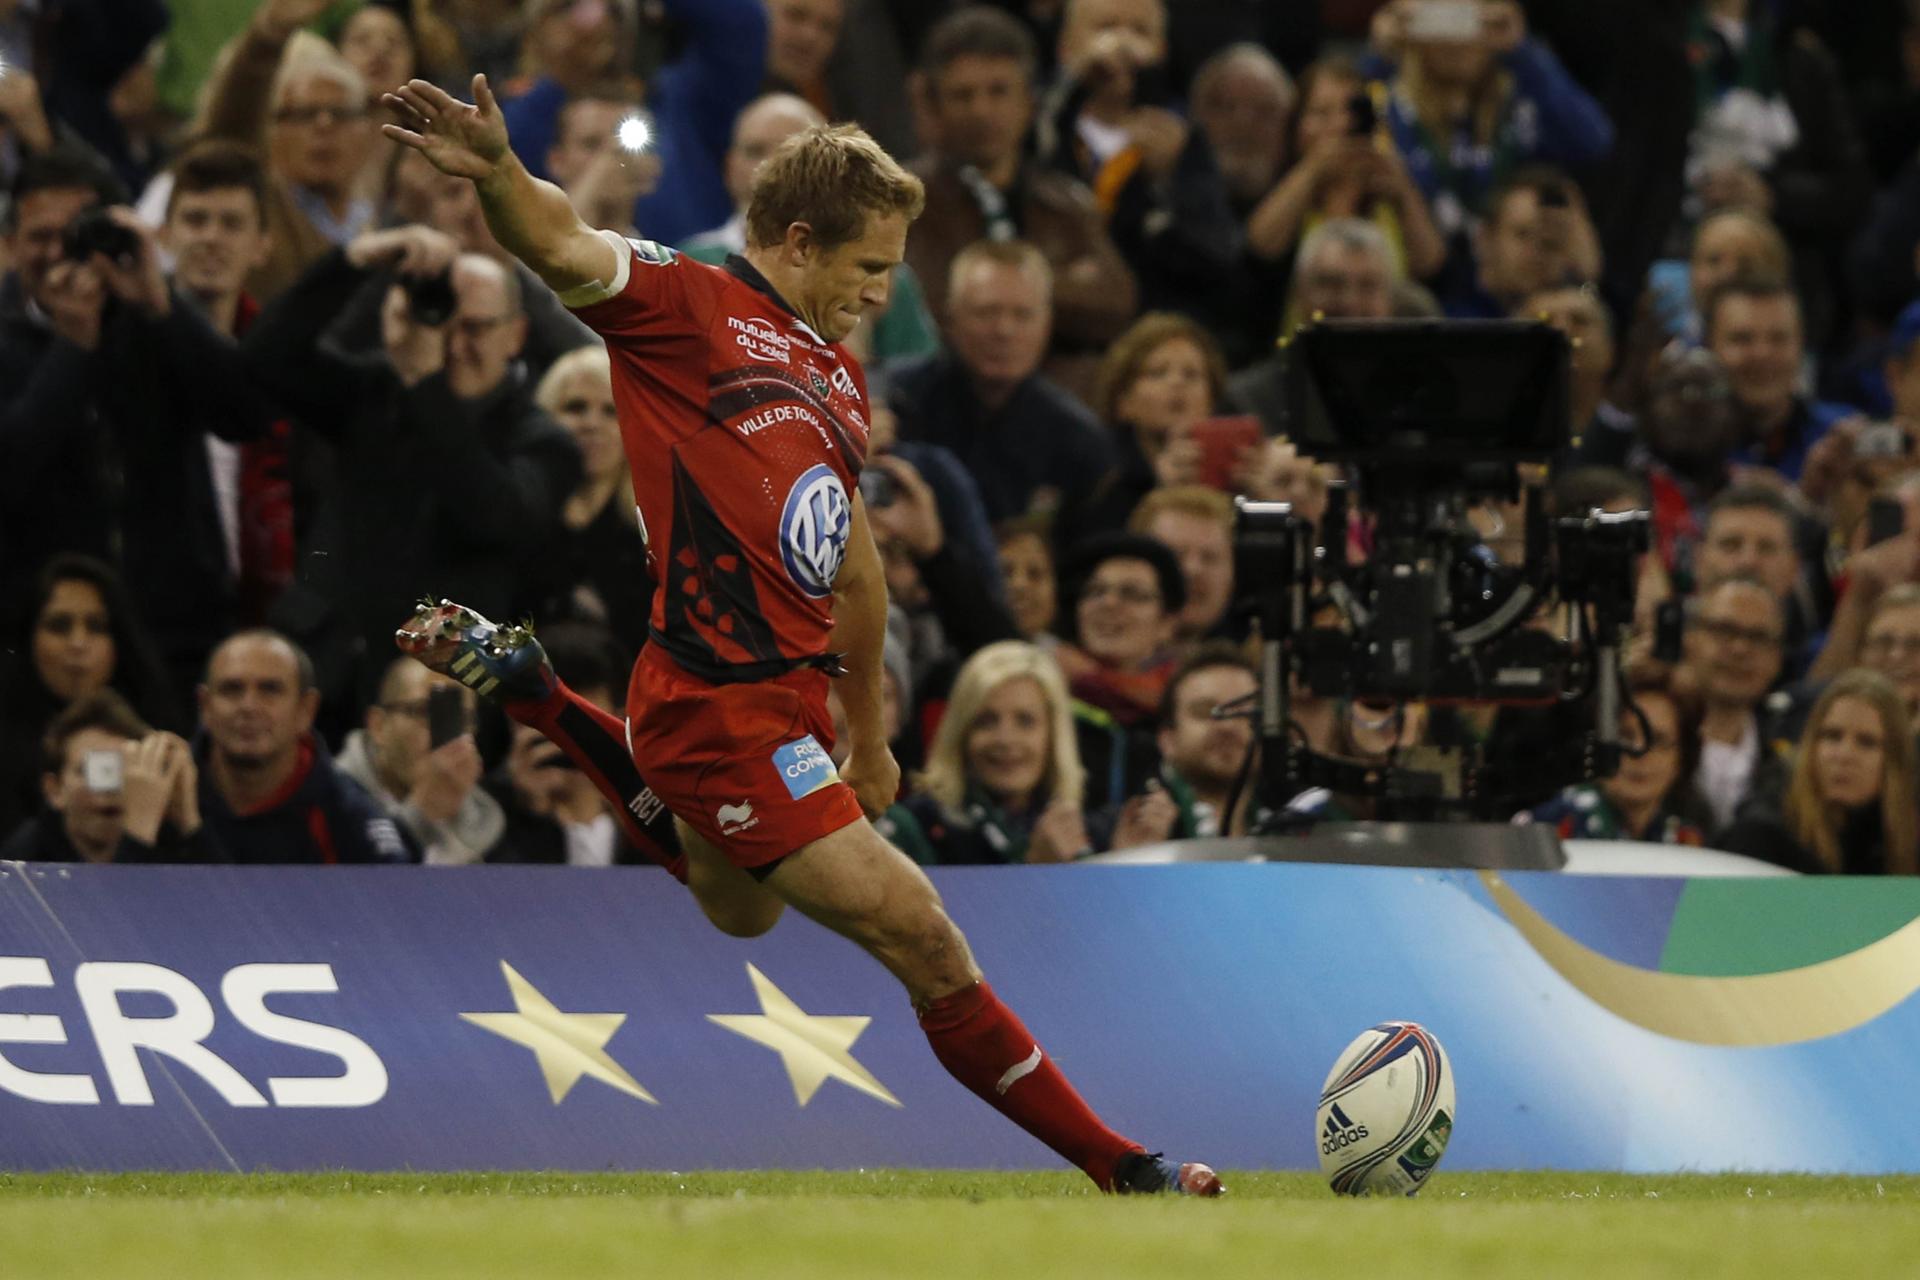 Jonny Wilkinson kicks a conversion for Toulon in their European Cup final against Saracens at Millennium Stadium in Cardiff. Photo: AFP